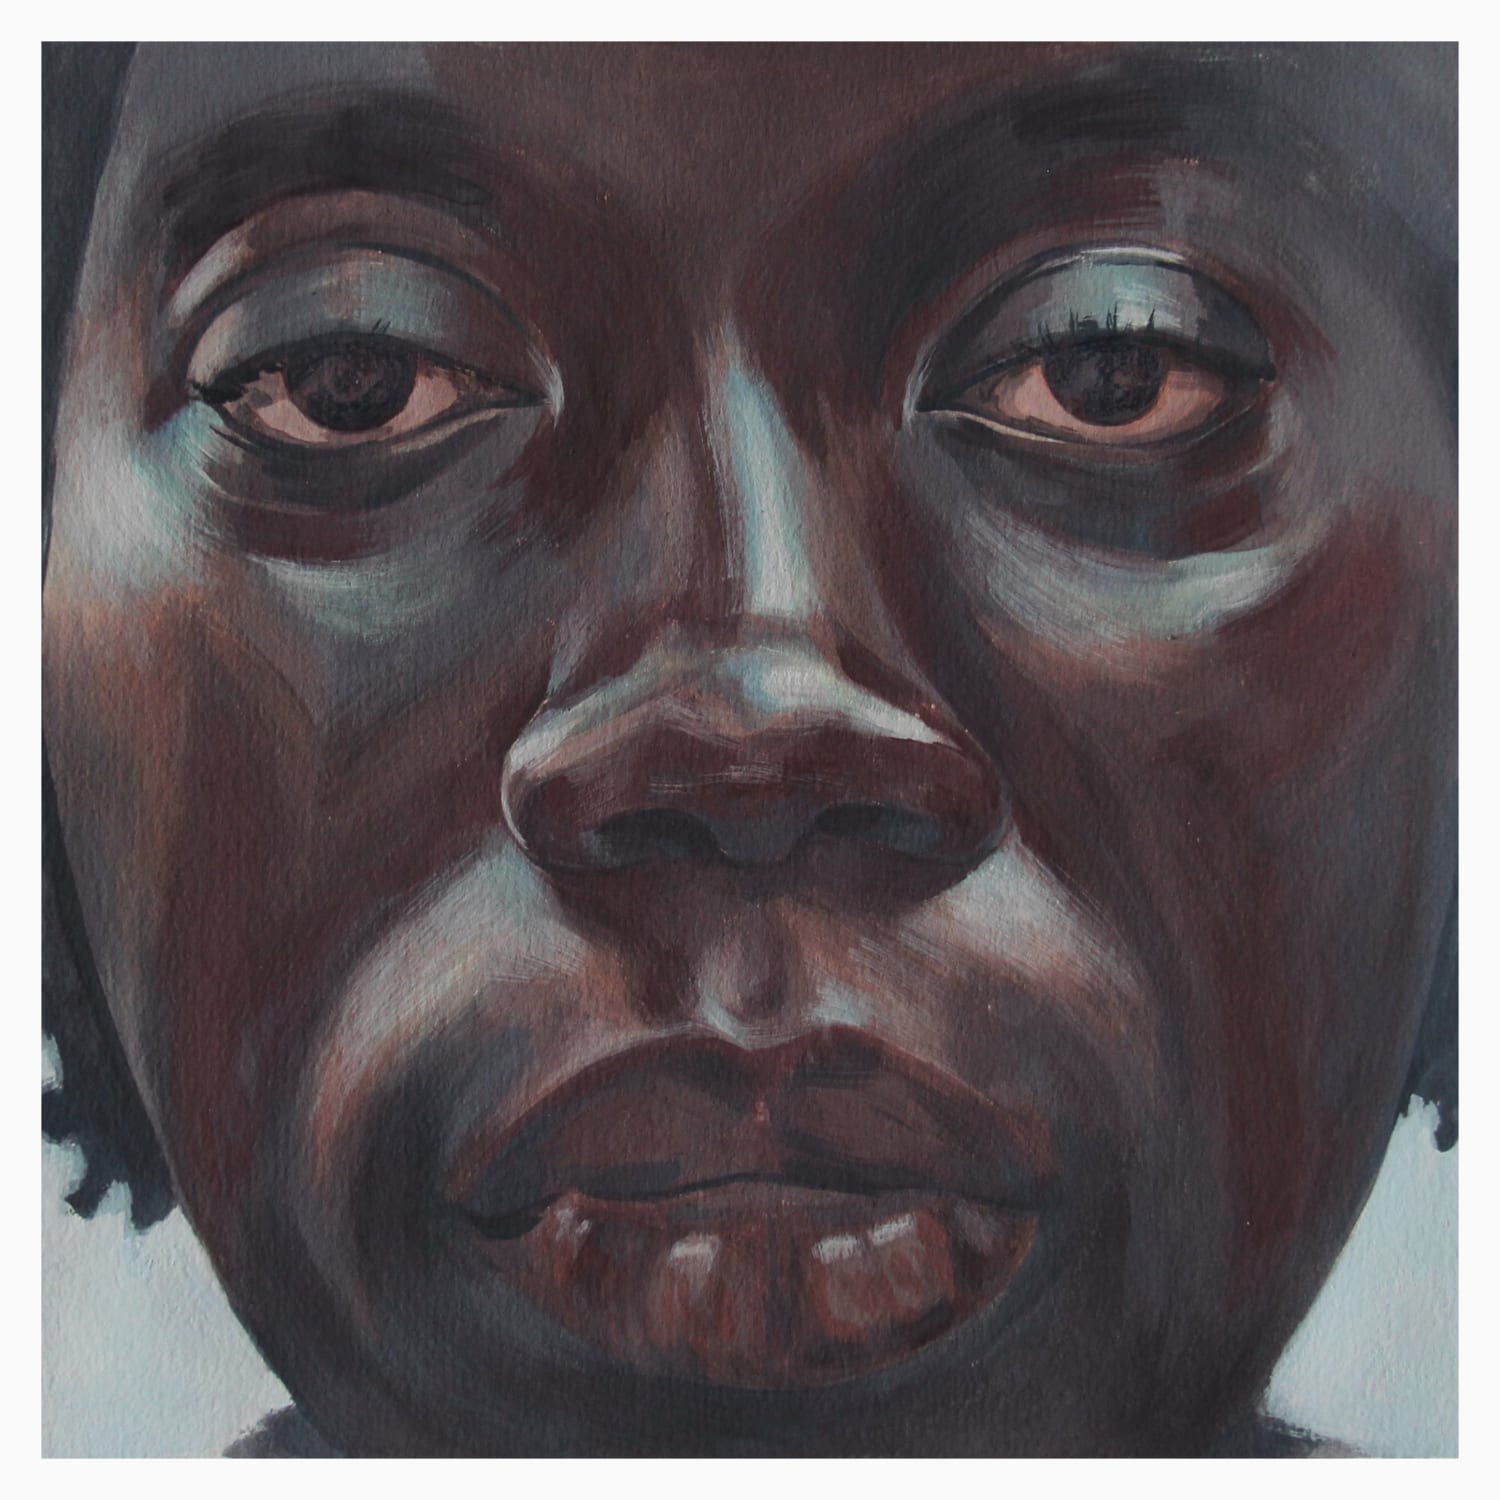 Painted the cover of "Minas" by Milton Nascimento